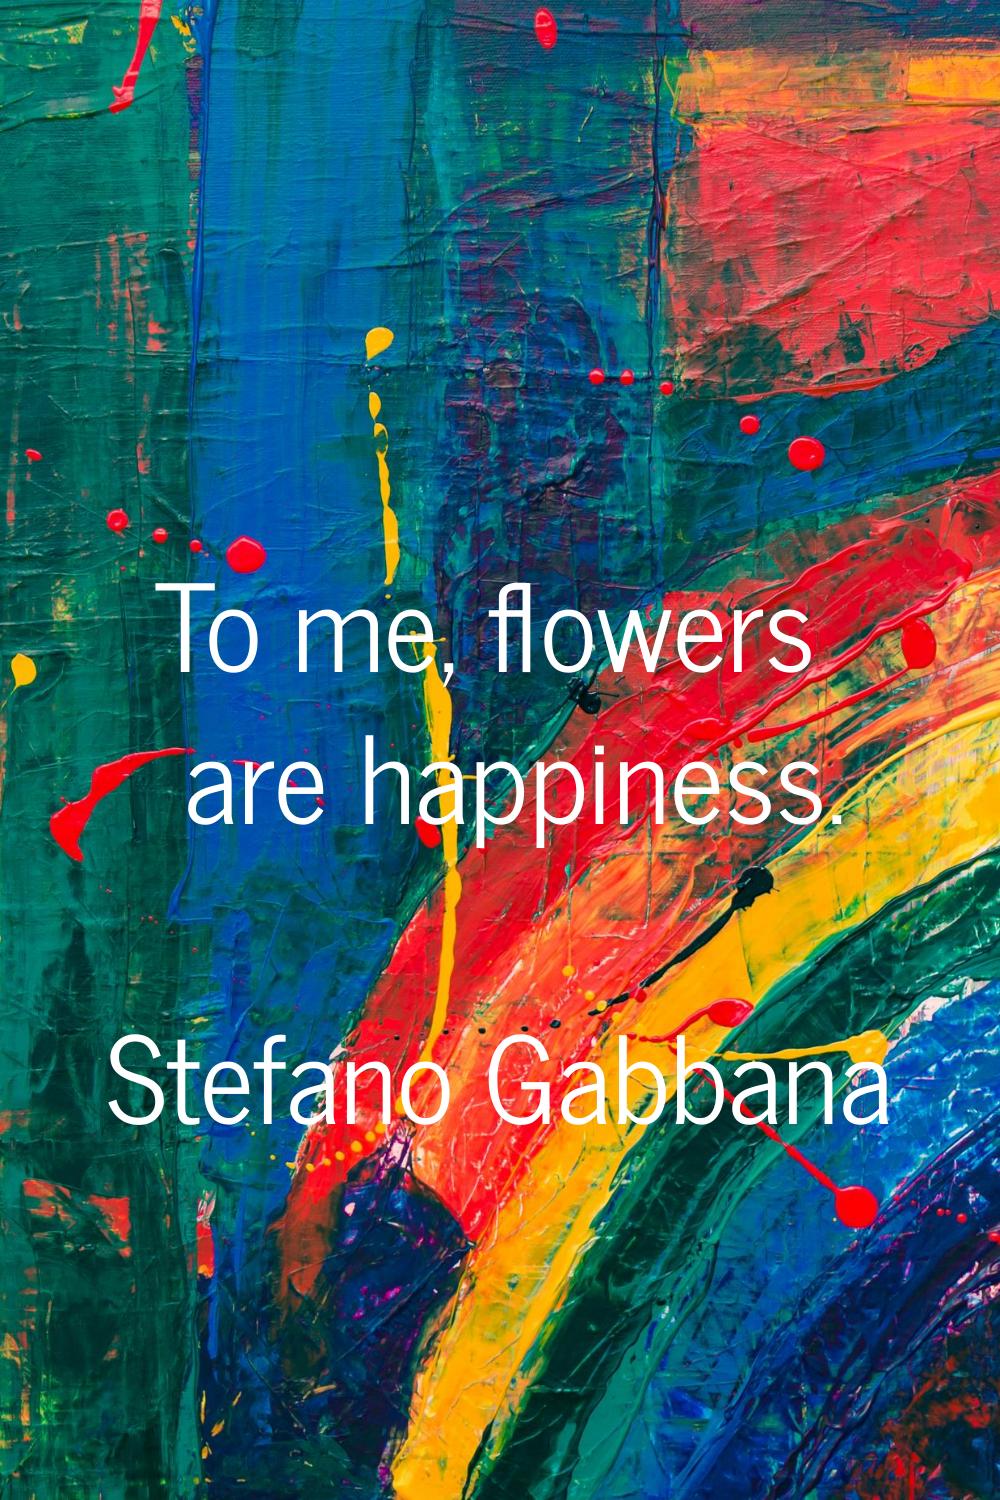 To me, flowers are happiness.